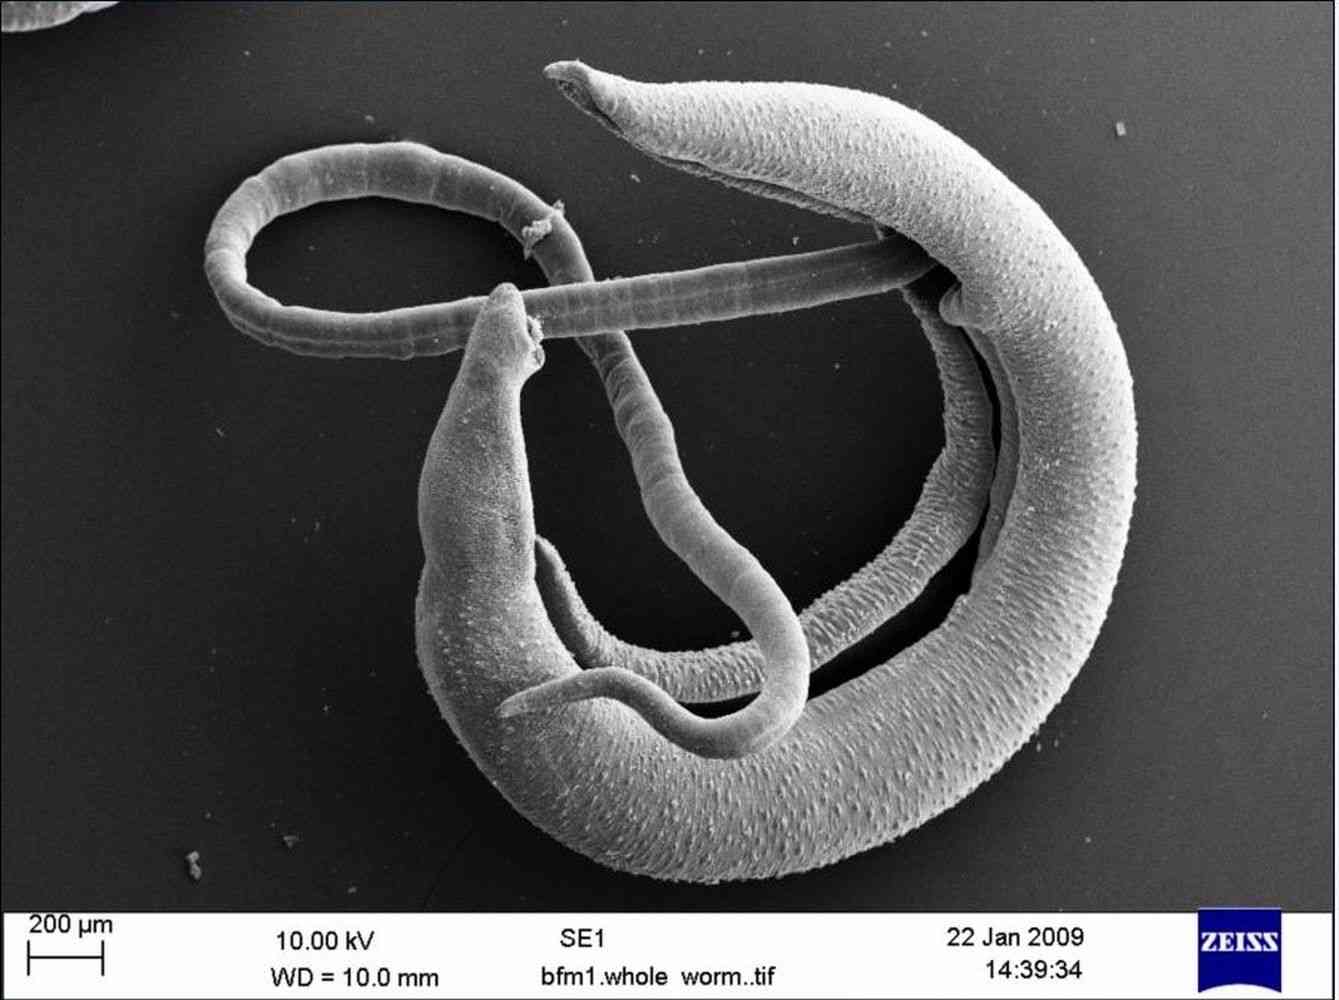 Scanning electron micrograph of Schistosoma bovis - an agent of ruminant schistosomiasis - Hybrid forms of S. bovis-S. haematobium can infect humans and are reported in West Africa and Corsica.